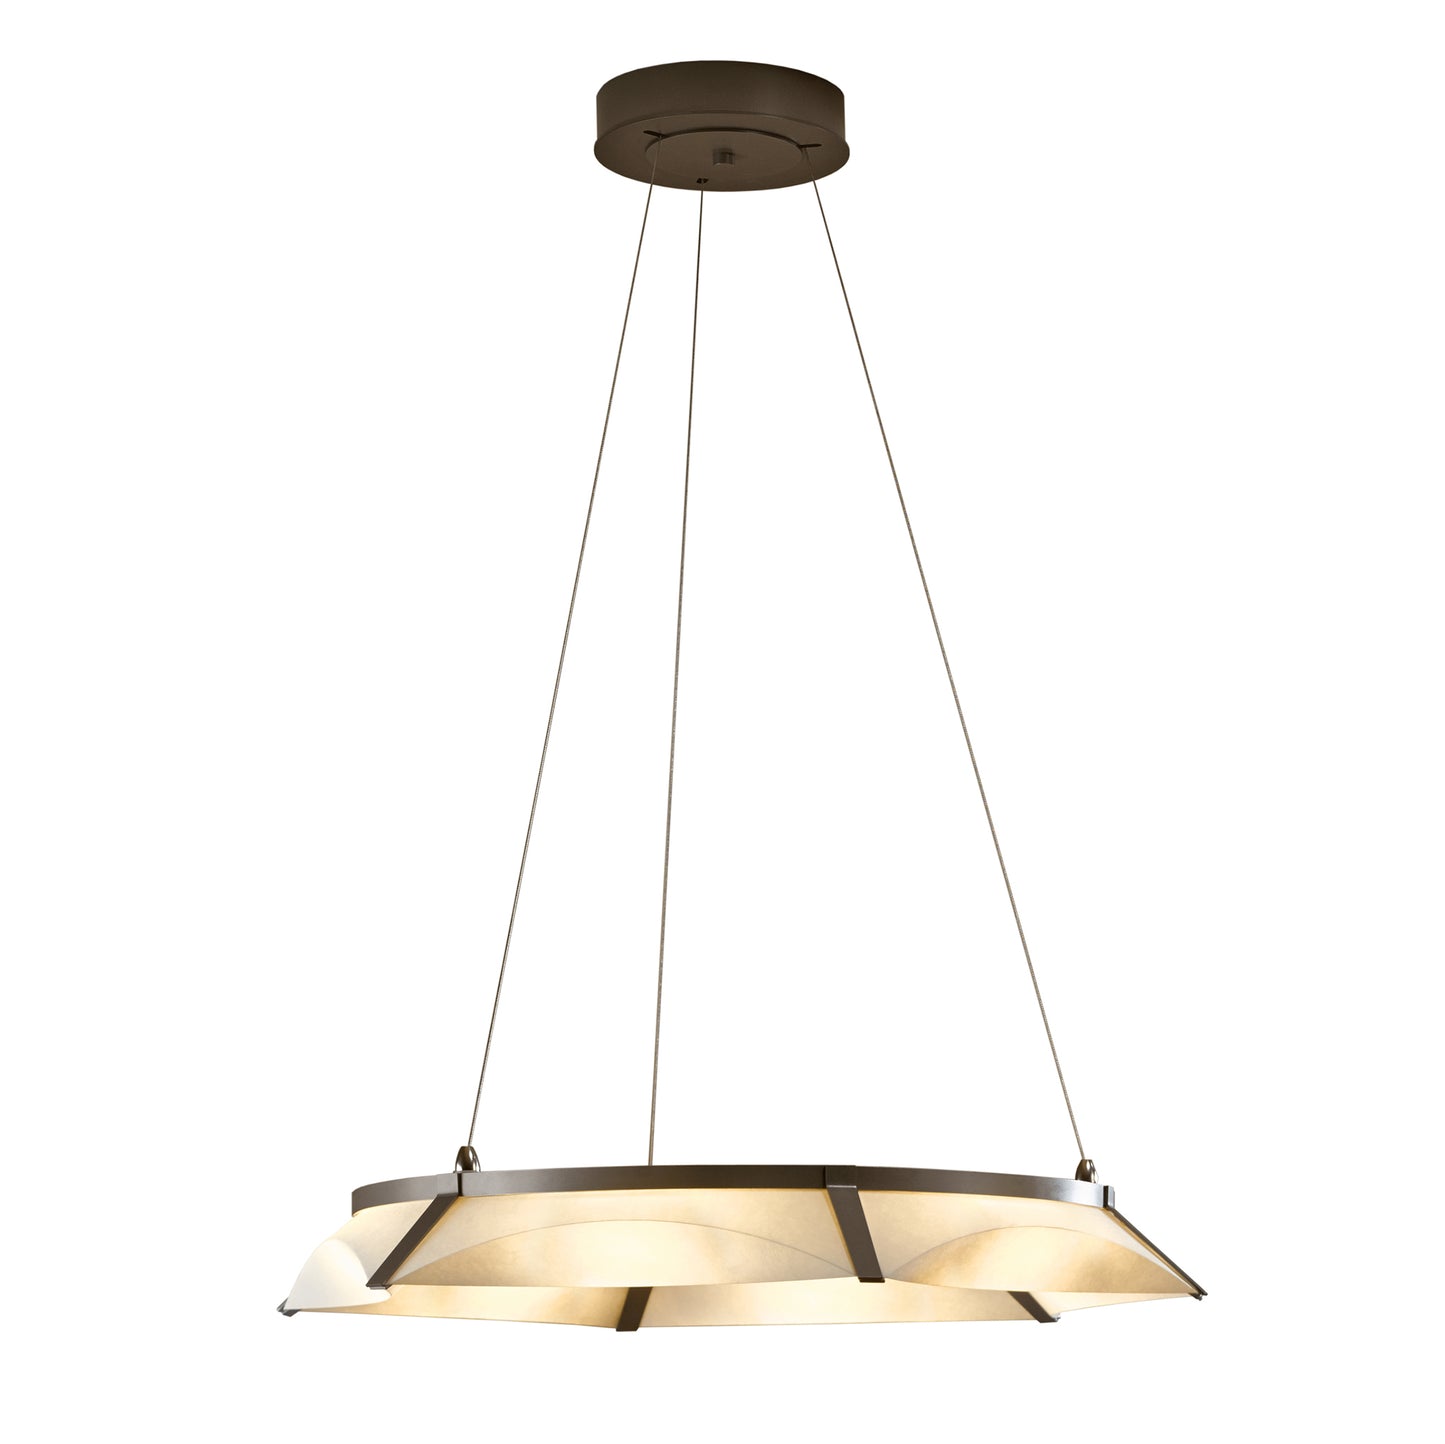 The Hubbardton Forge Bento Pendant features a stunning round glass shade.